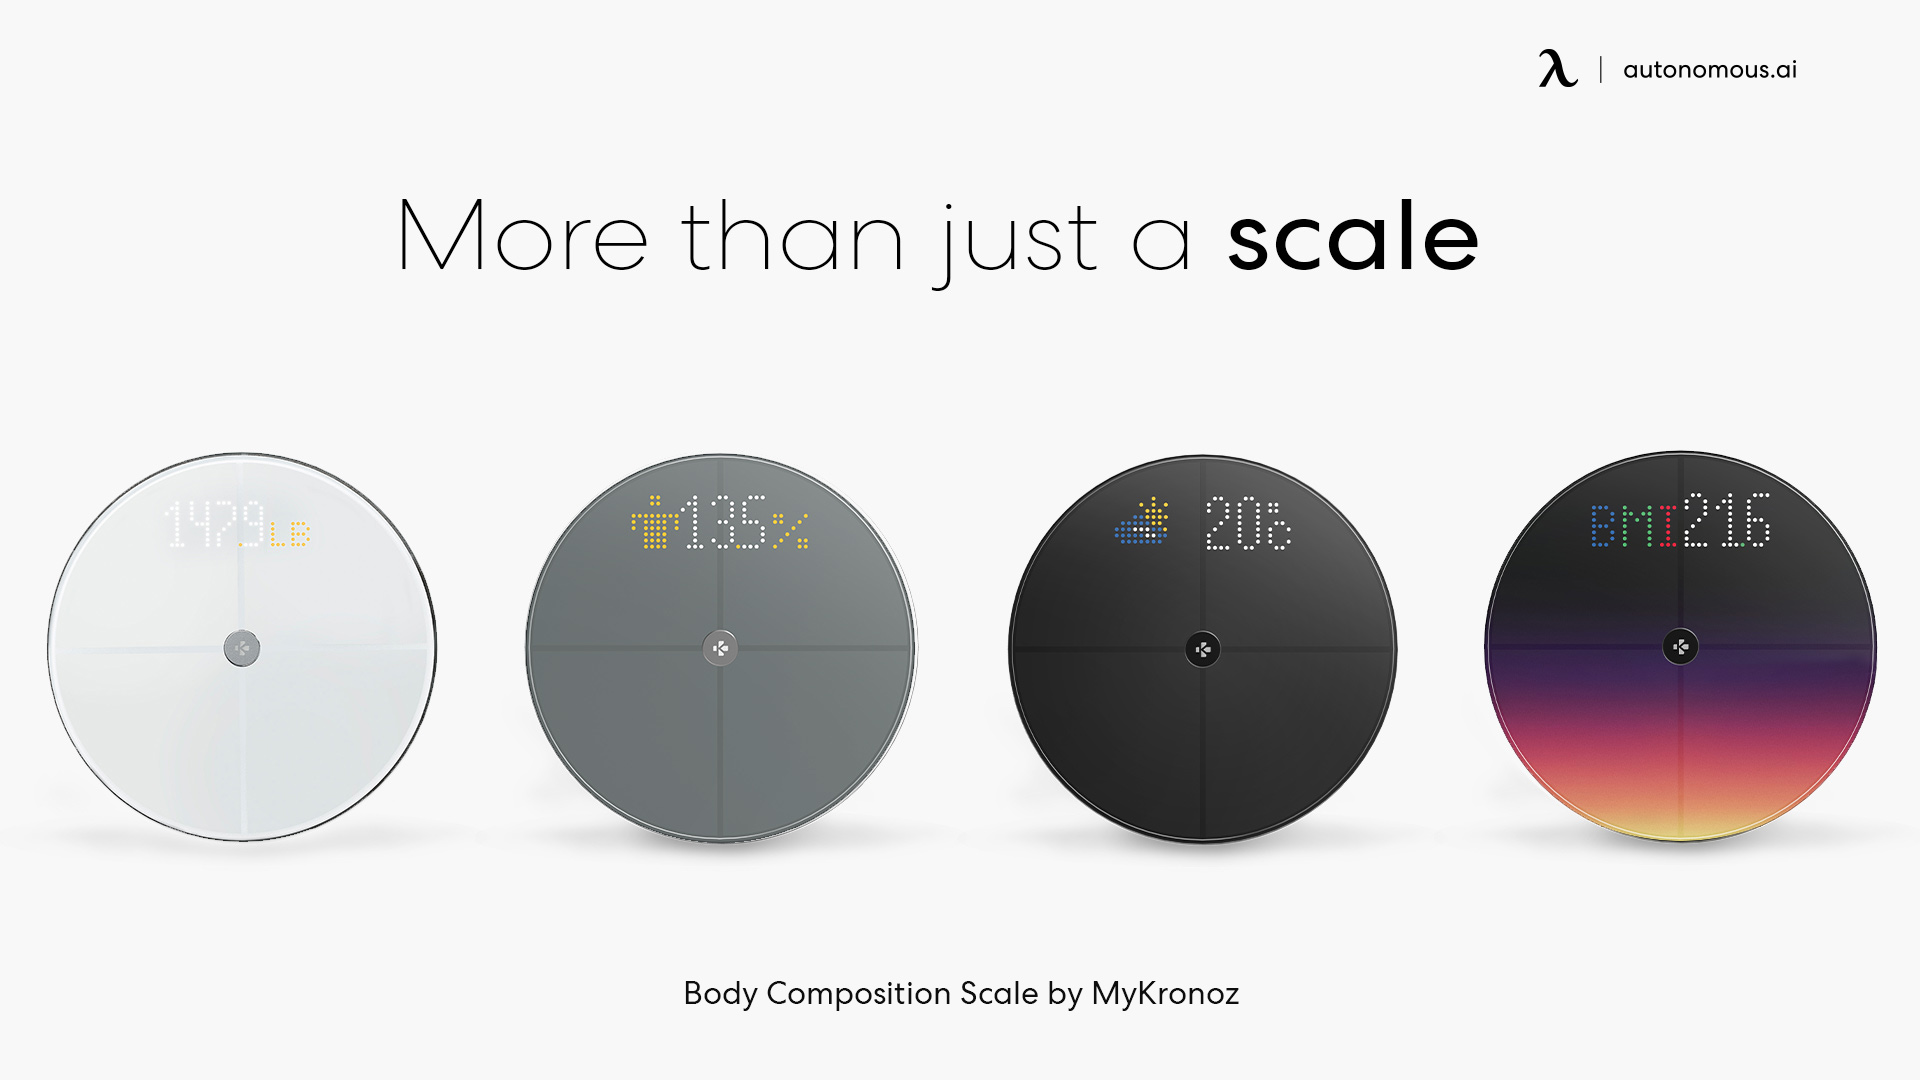 Body Composition Scale by MyKronoz